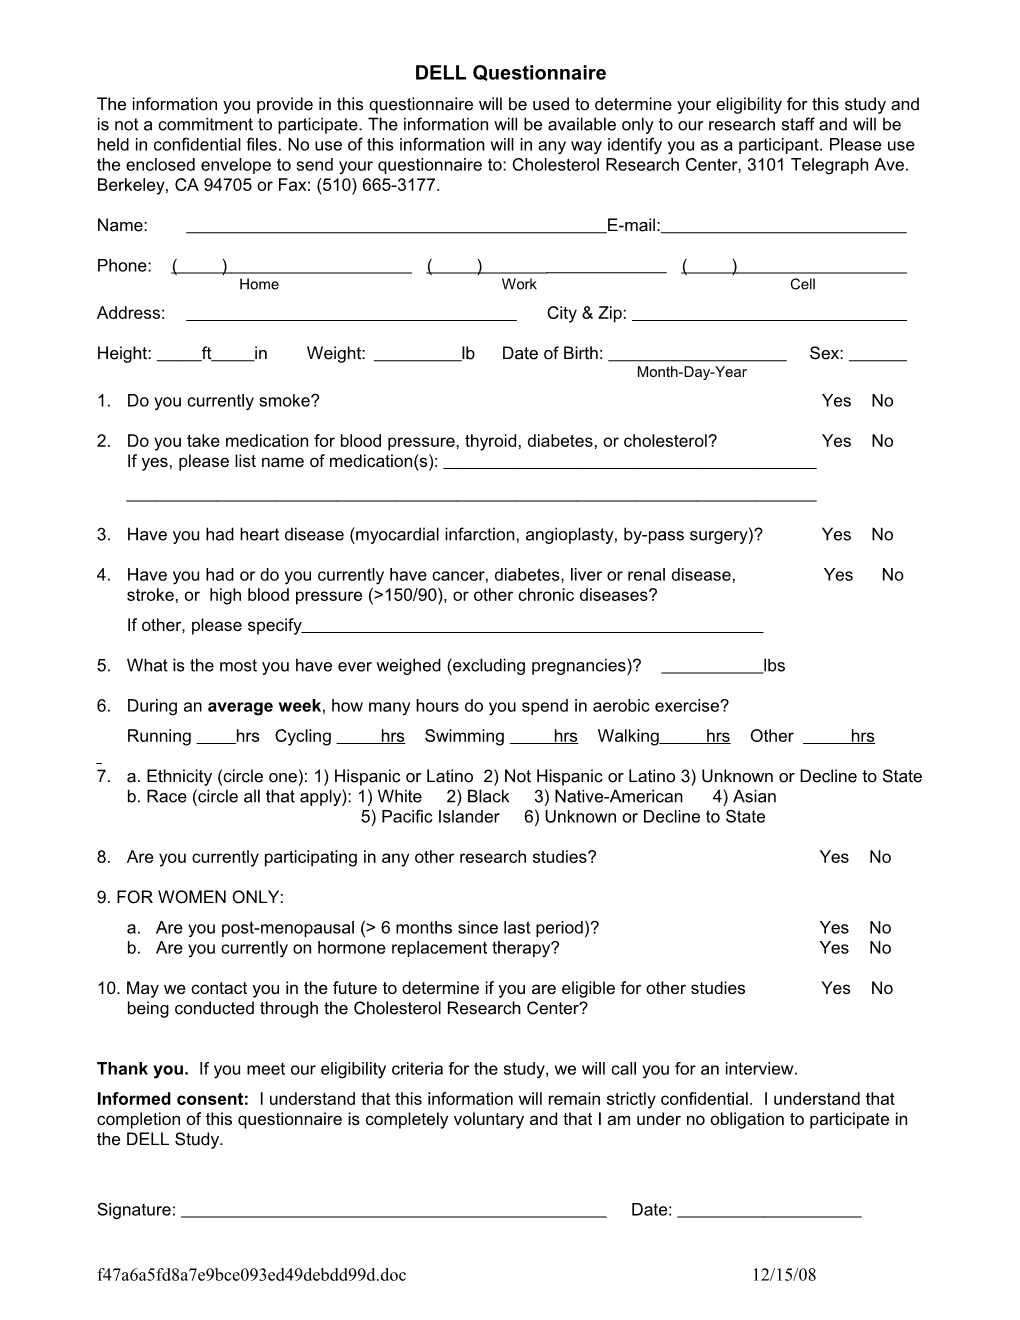 The Information You Provide in This Questionnaire Will Be Used to Determine Your Eligibility